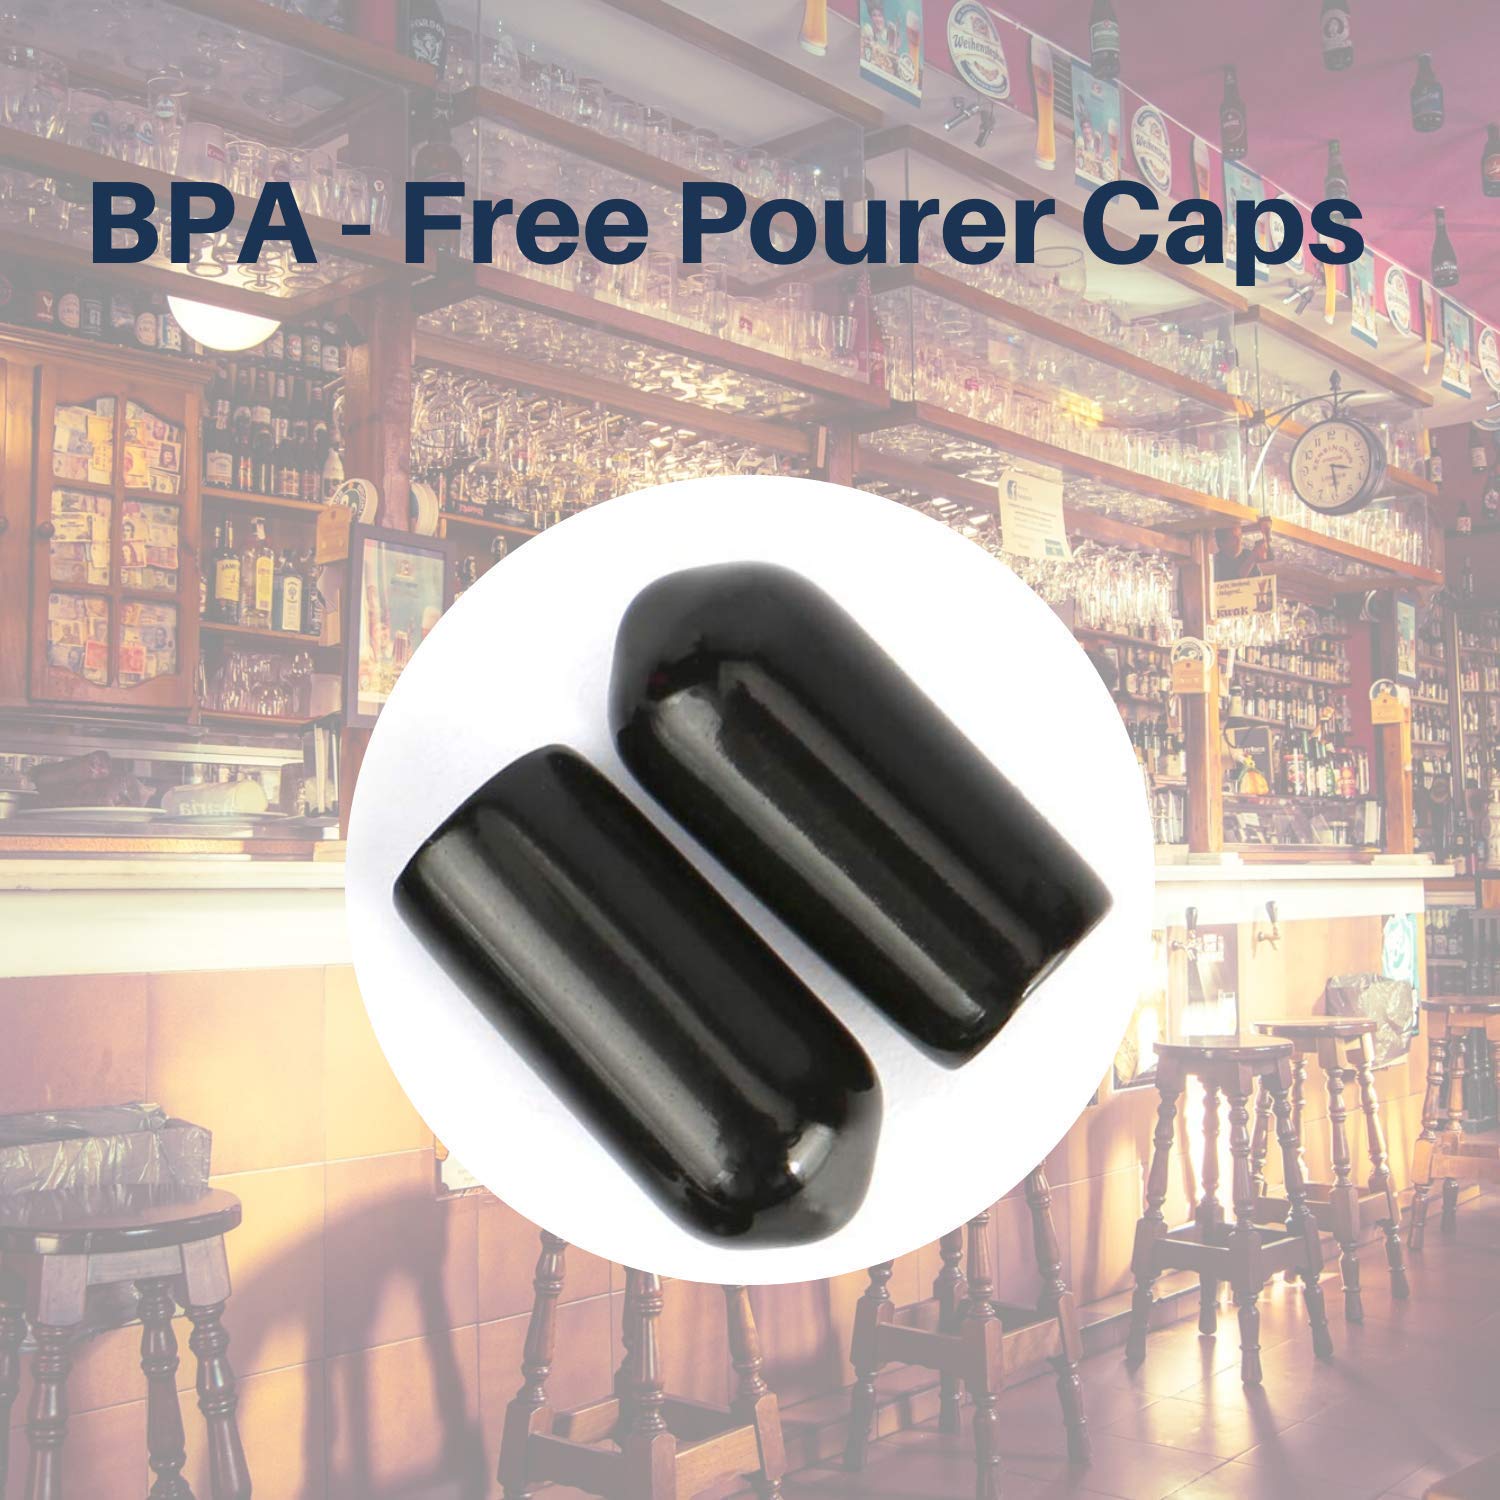 NJ Metal Bottle Pourers for Syrup Wine Olive Oil, Pouring Spouts for Liquor for Bar, Hotel, Kitchen Use Flowing with Dust Covers : Pack of 4 (with black PVC Caps) + 1 PC Peg Measure + 1 Cleaning Brush